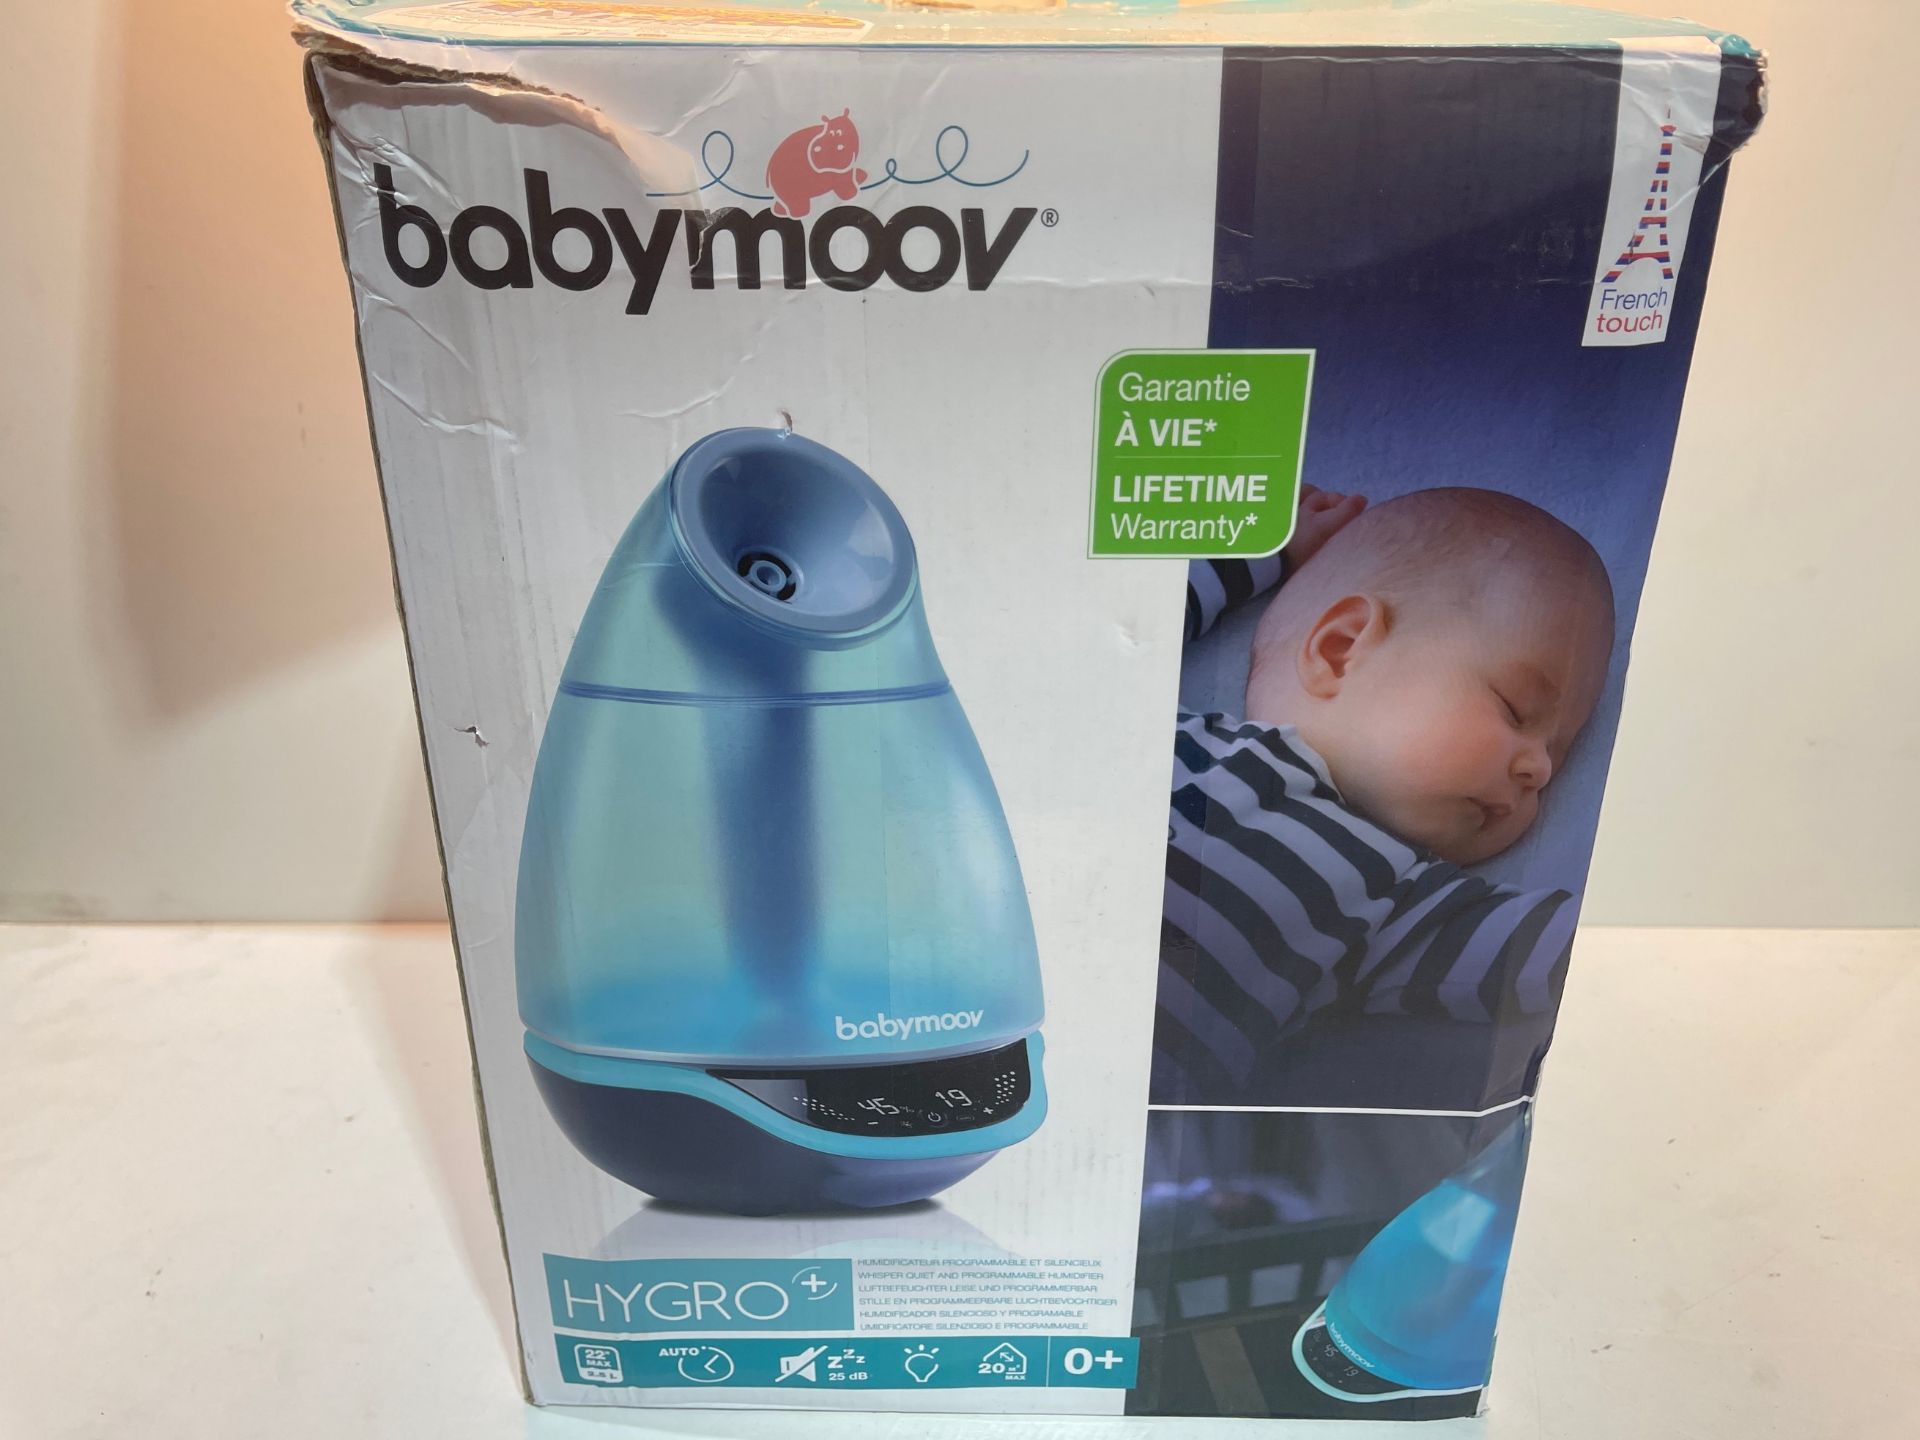 Babymoov Hygro Plus, digital humidifier with night light (7 colors), automatic humidity control, - Image 2 of 2